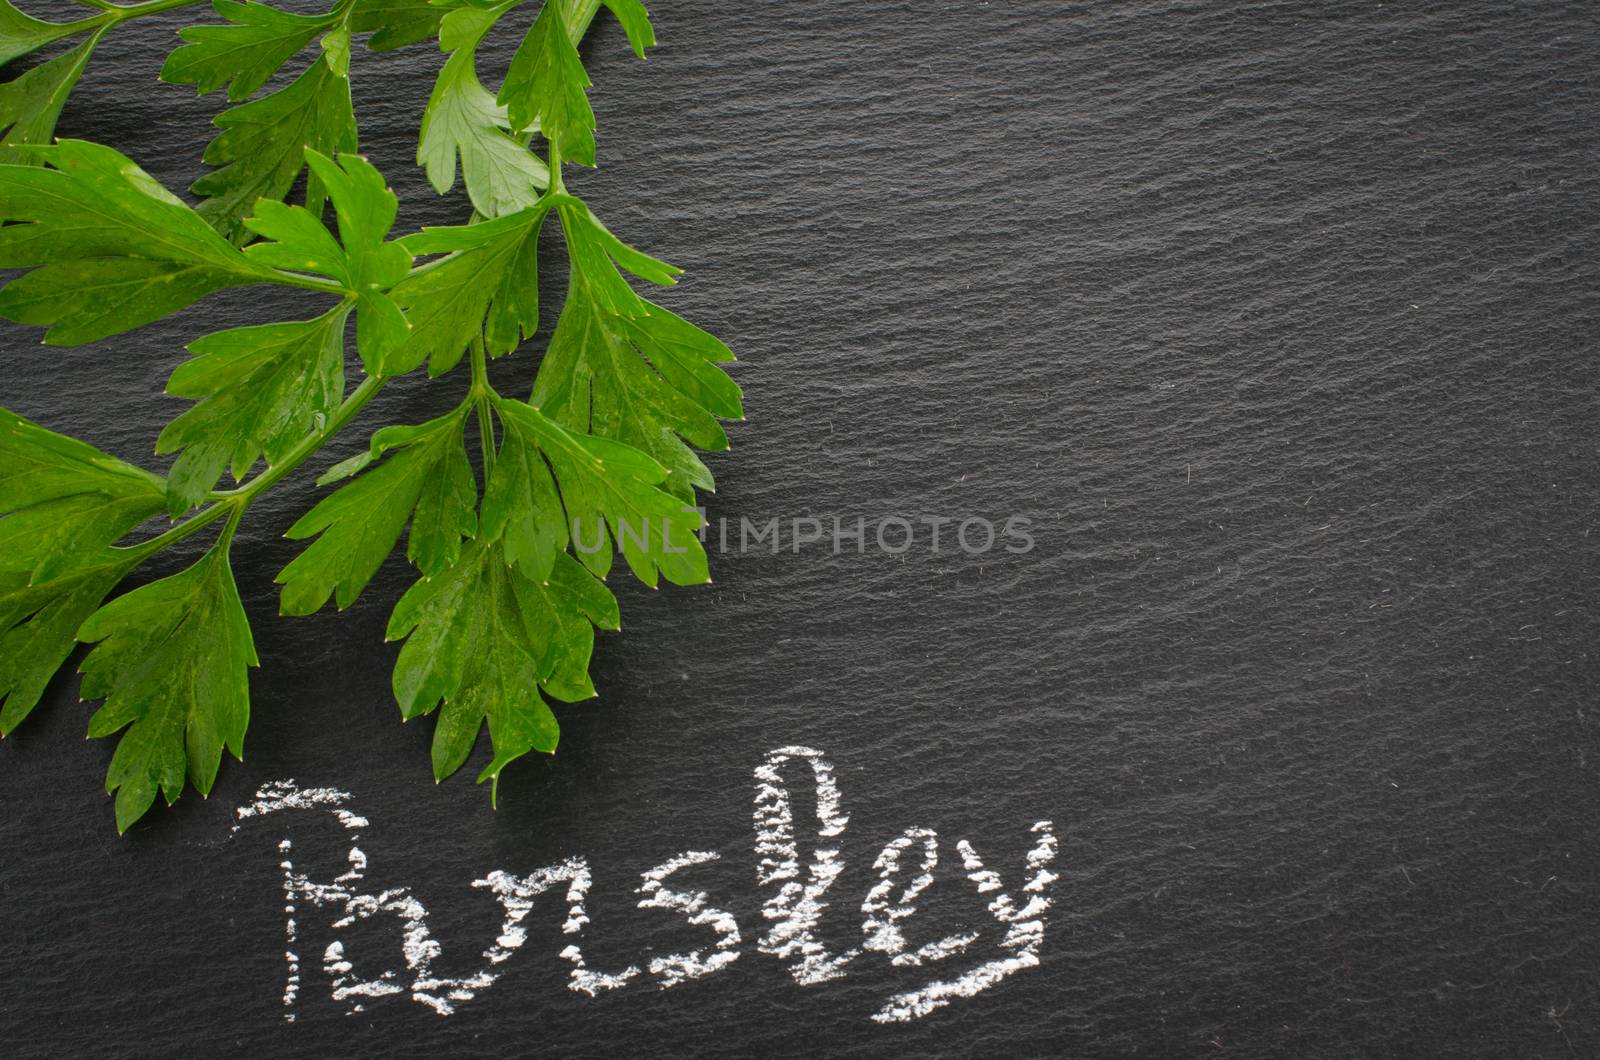 Parsley by AnaMarques